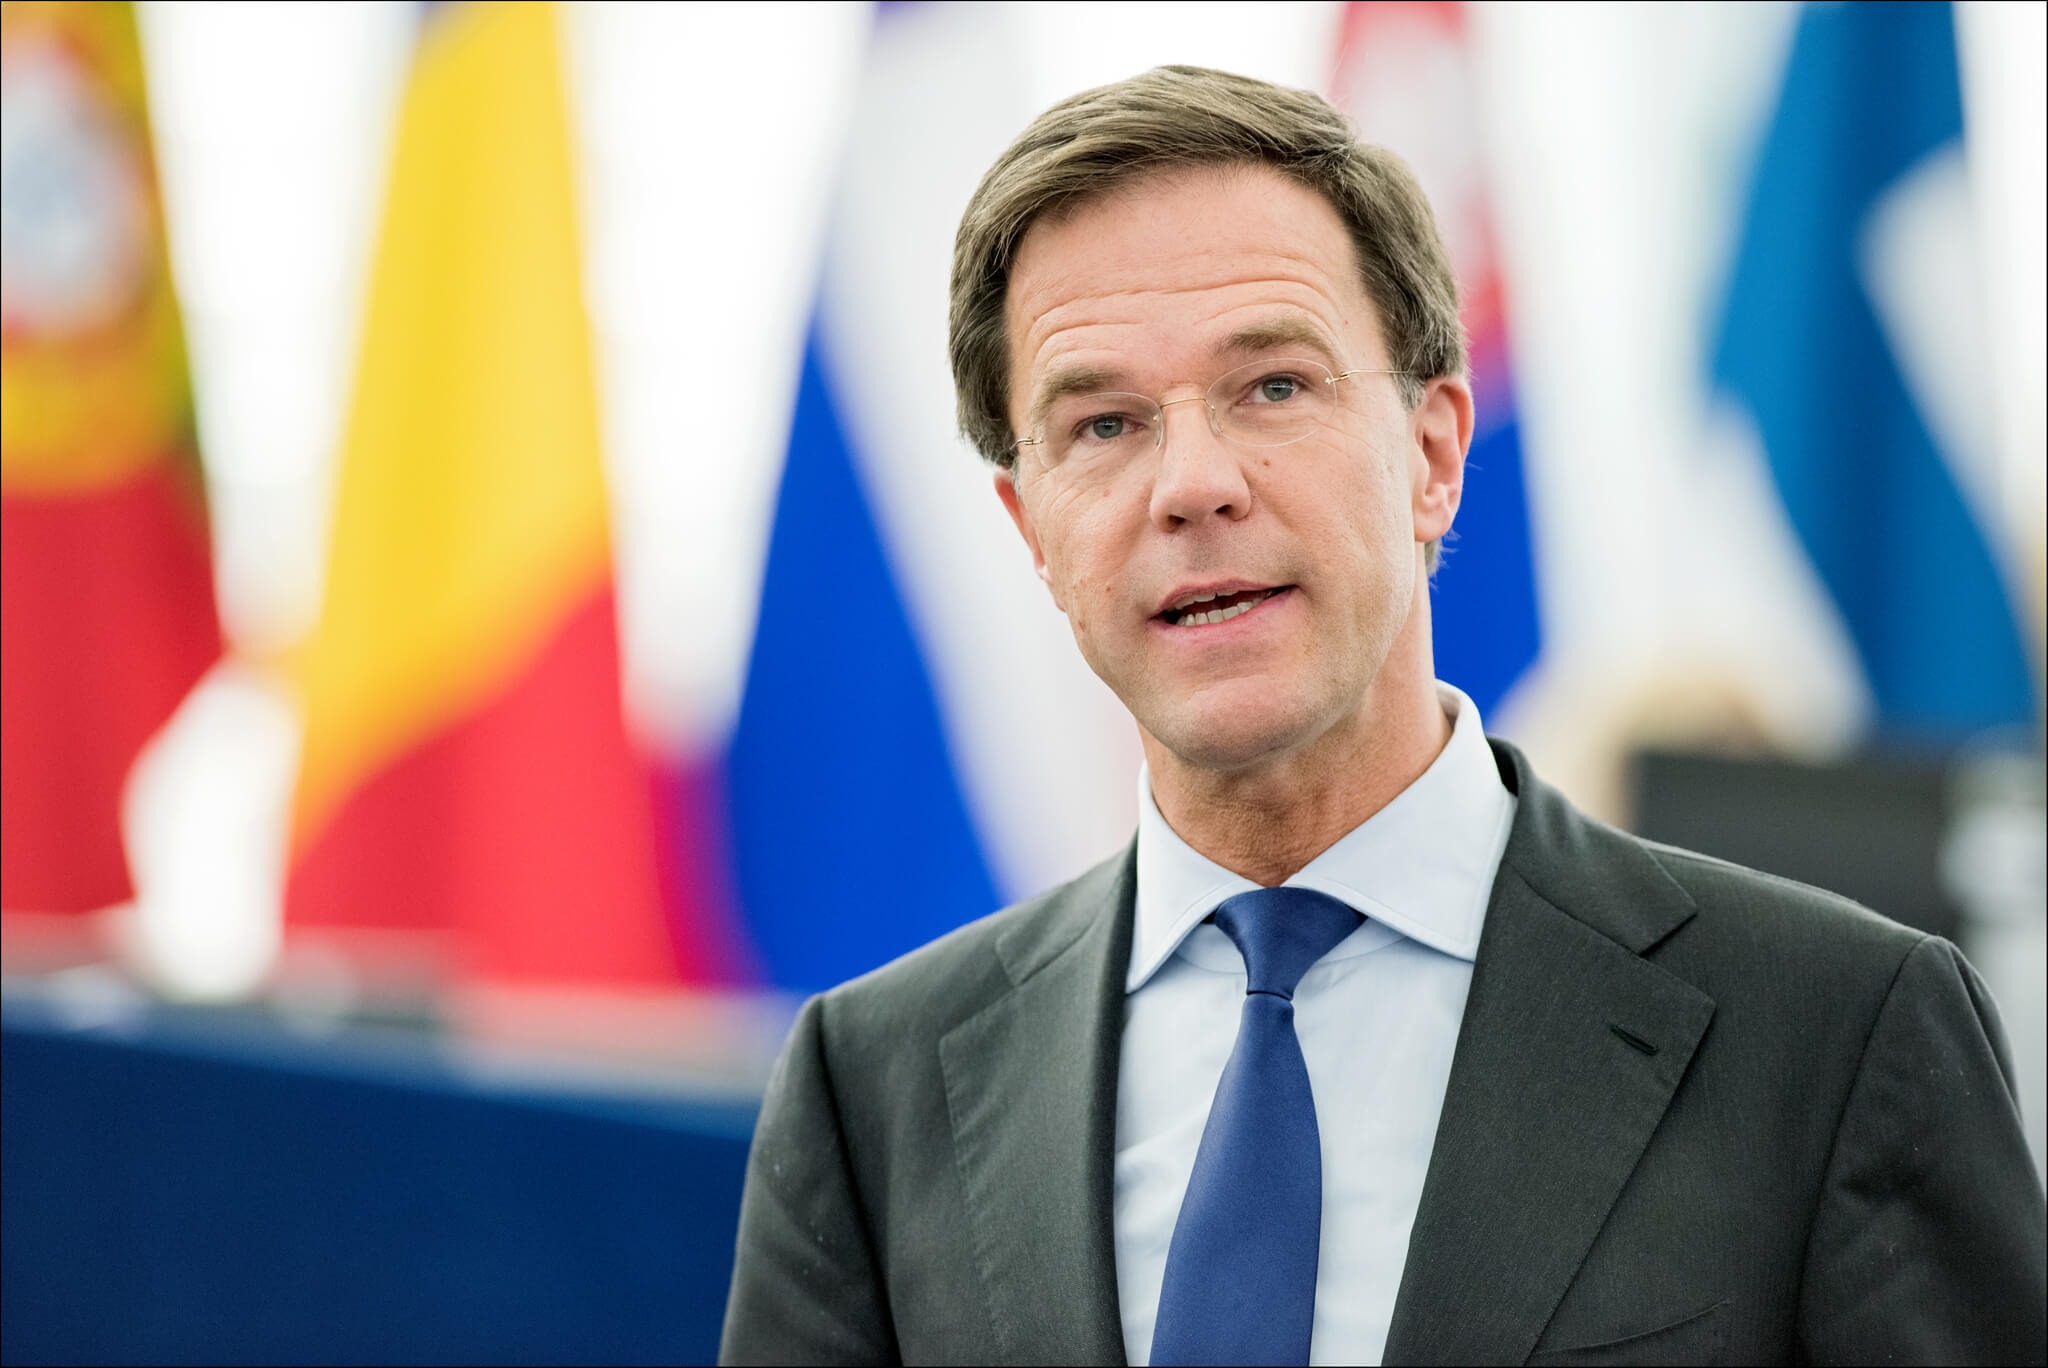 Dutch prime minister Mark Rutte debating the priorities of the Dutch Council Presidency with MEP's in 2016. © European Parliament